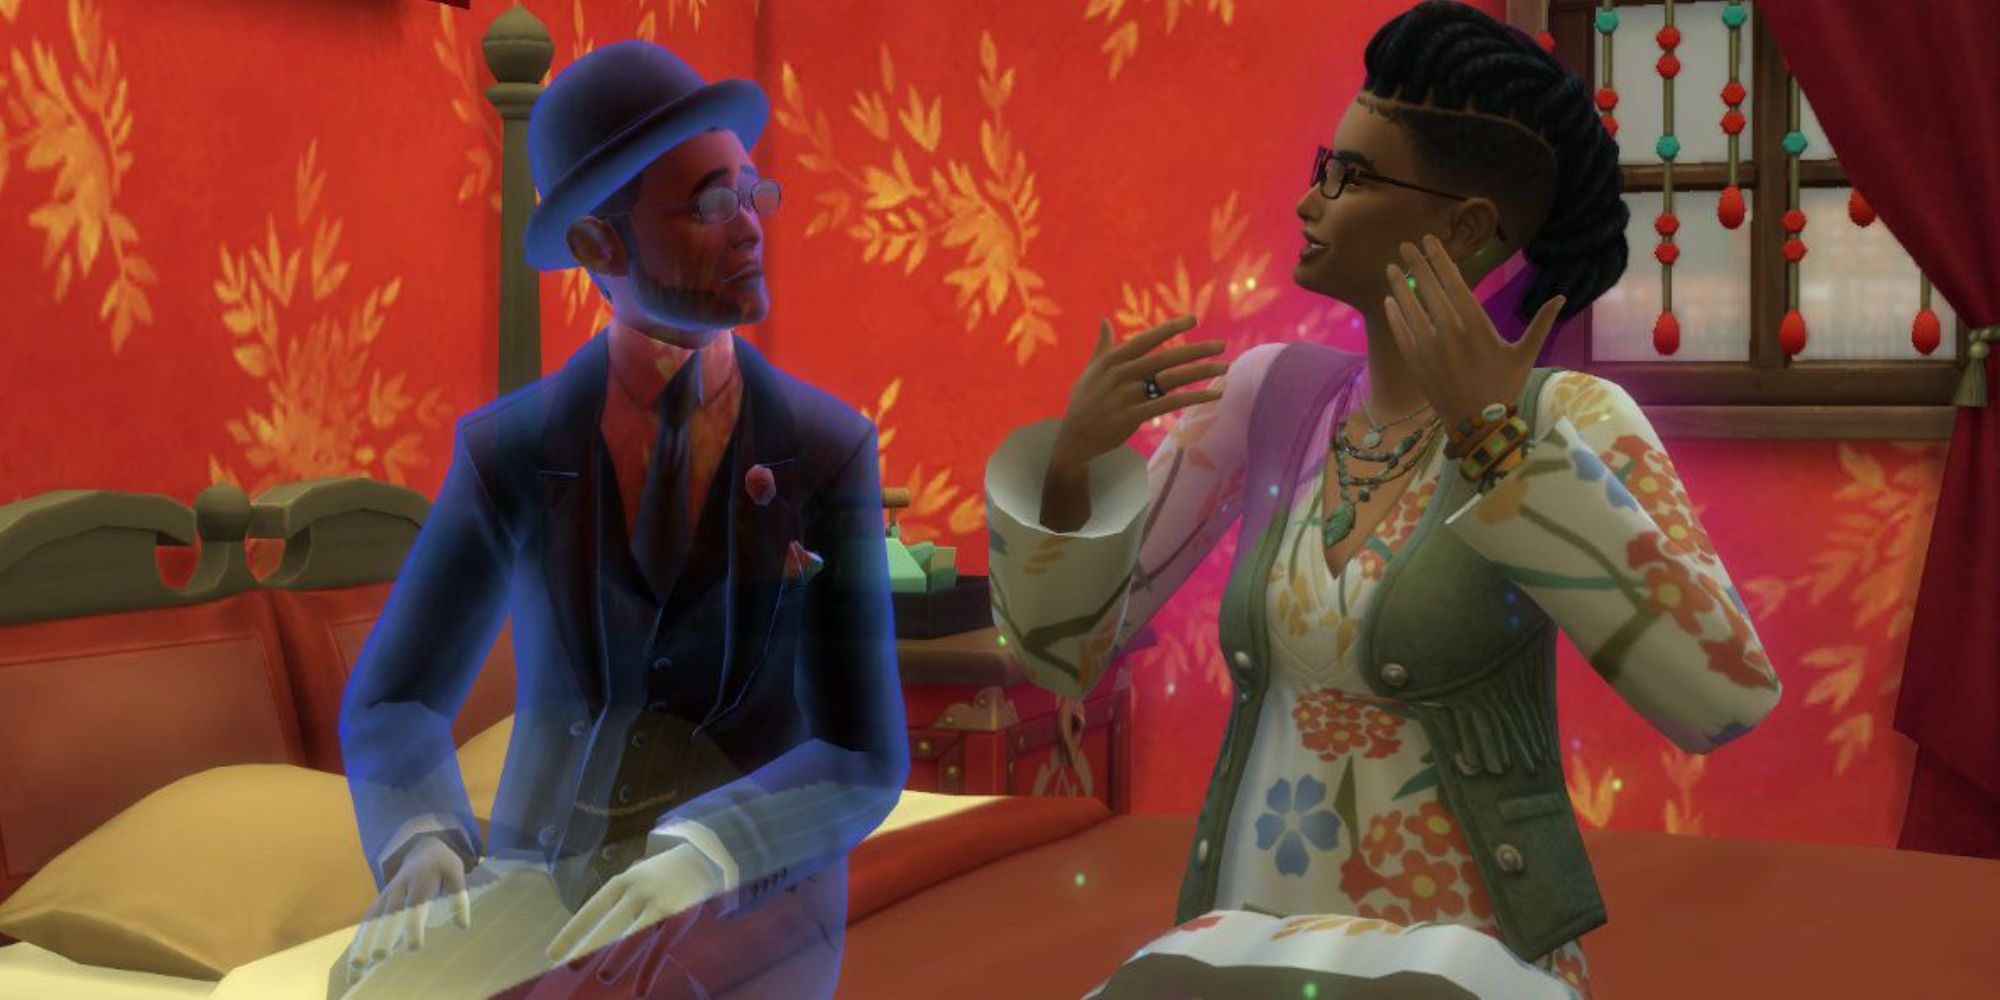 Sims 4 paranormal stuff female sim chatting to a well dressed male ghost